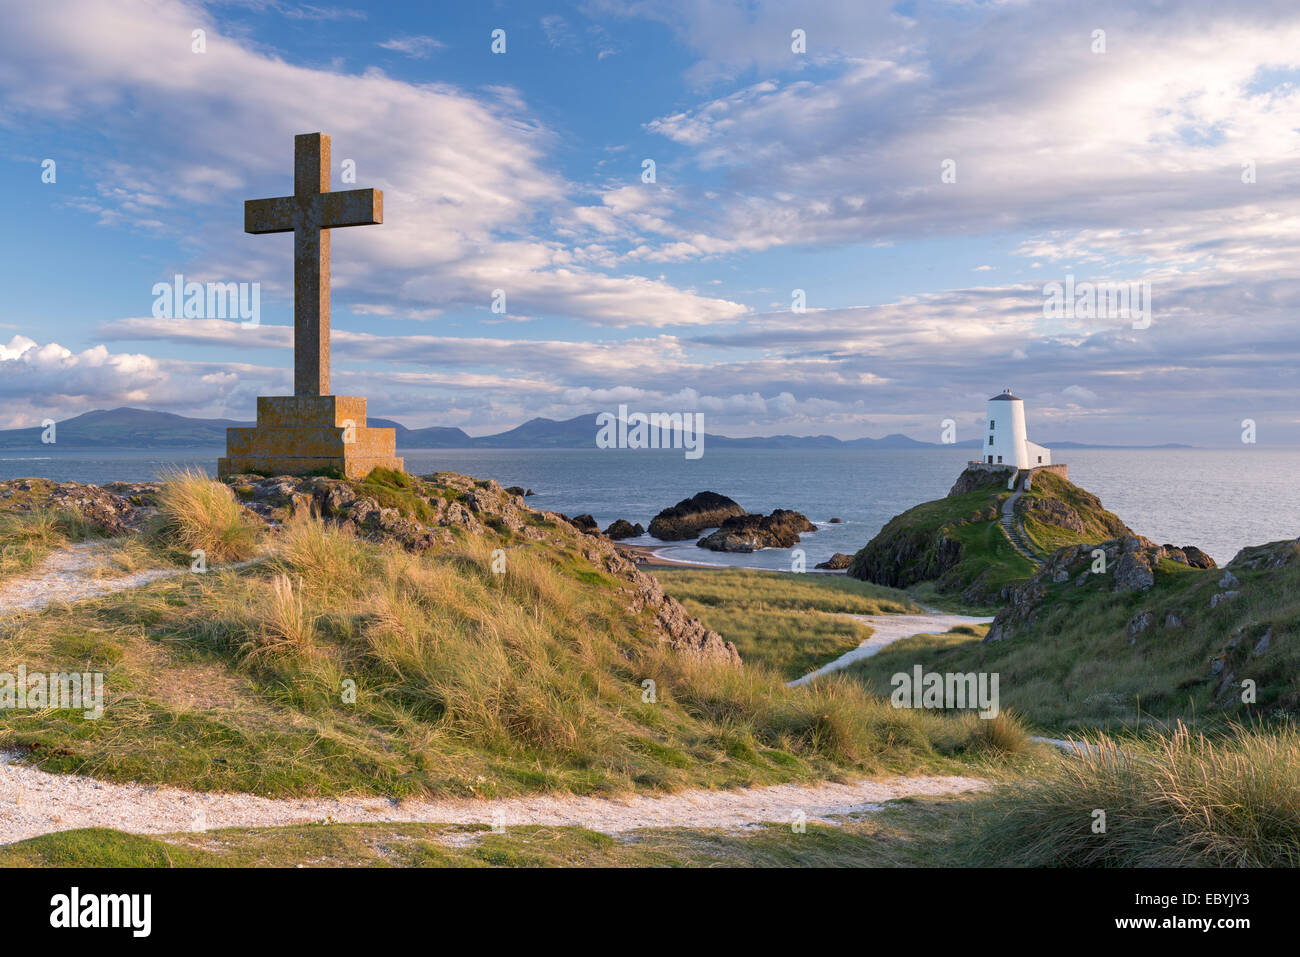 Cross and lighthouse on Llanddwyn Island, Anglesey, Wales. Autumn (September) 2013. Stock Photo